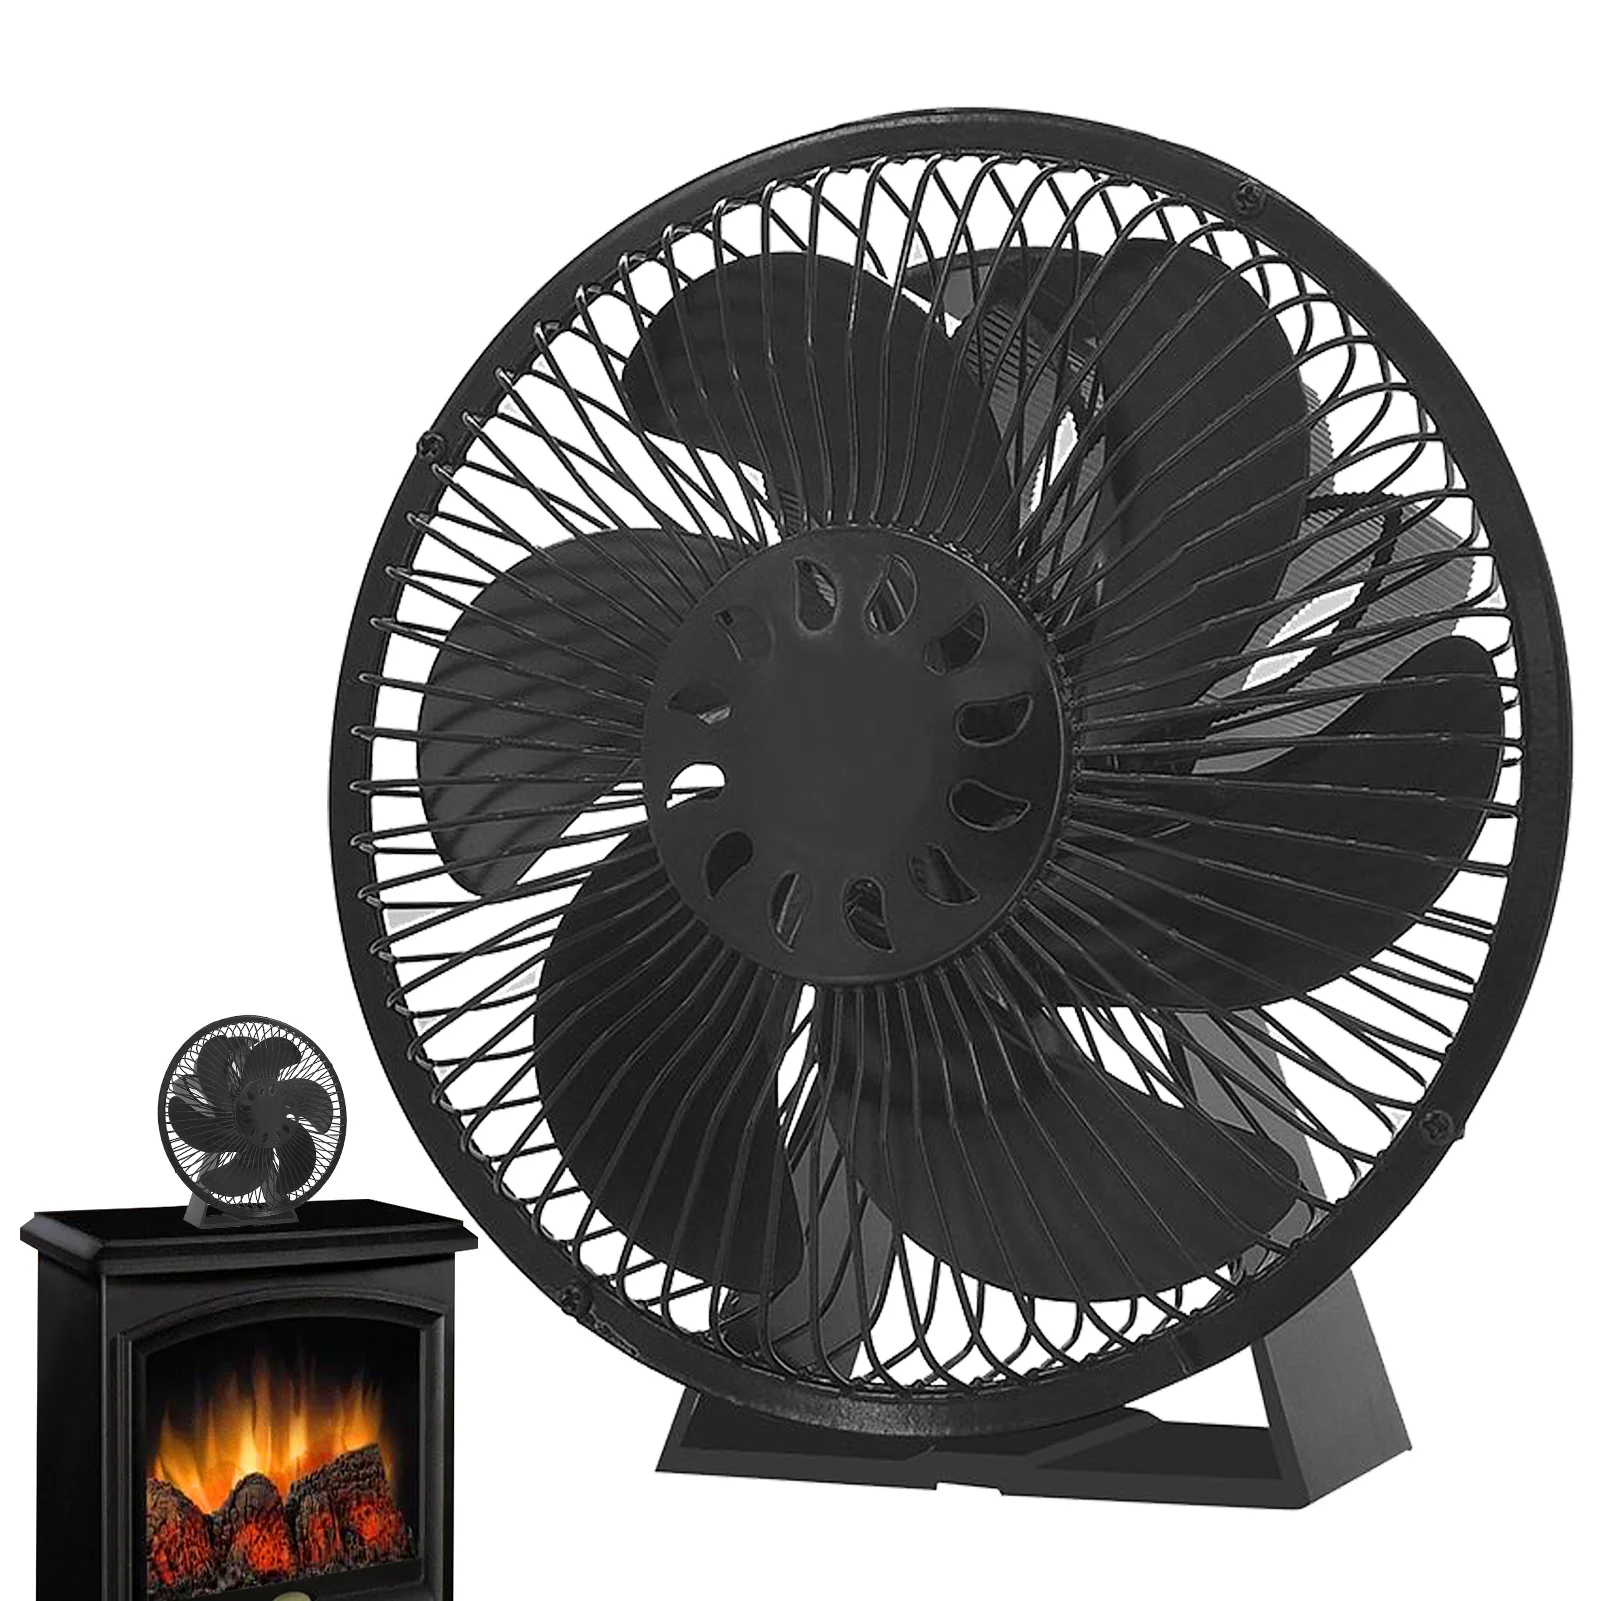 

Fireplace Fan 6-Blade Heat Powered Fan With Cover Wood Stove Fan Blower With Cover For Wood/Log Burner/Fireplace Quiet Operation